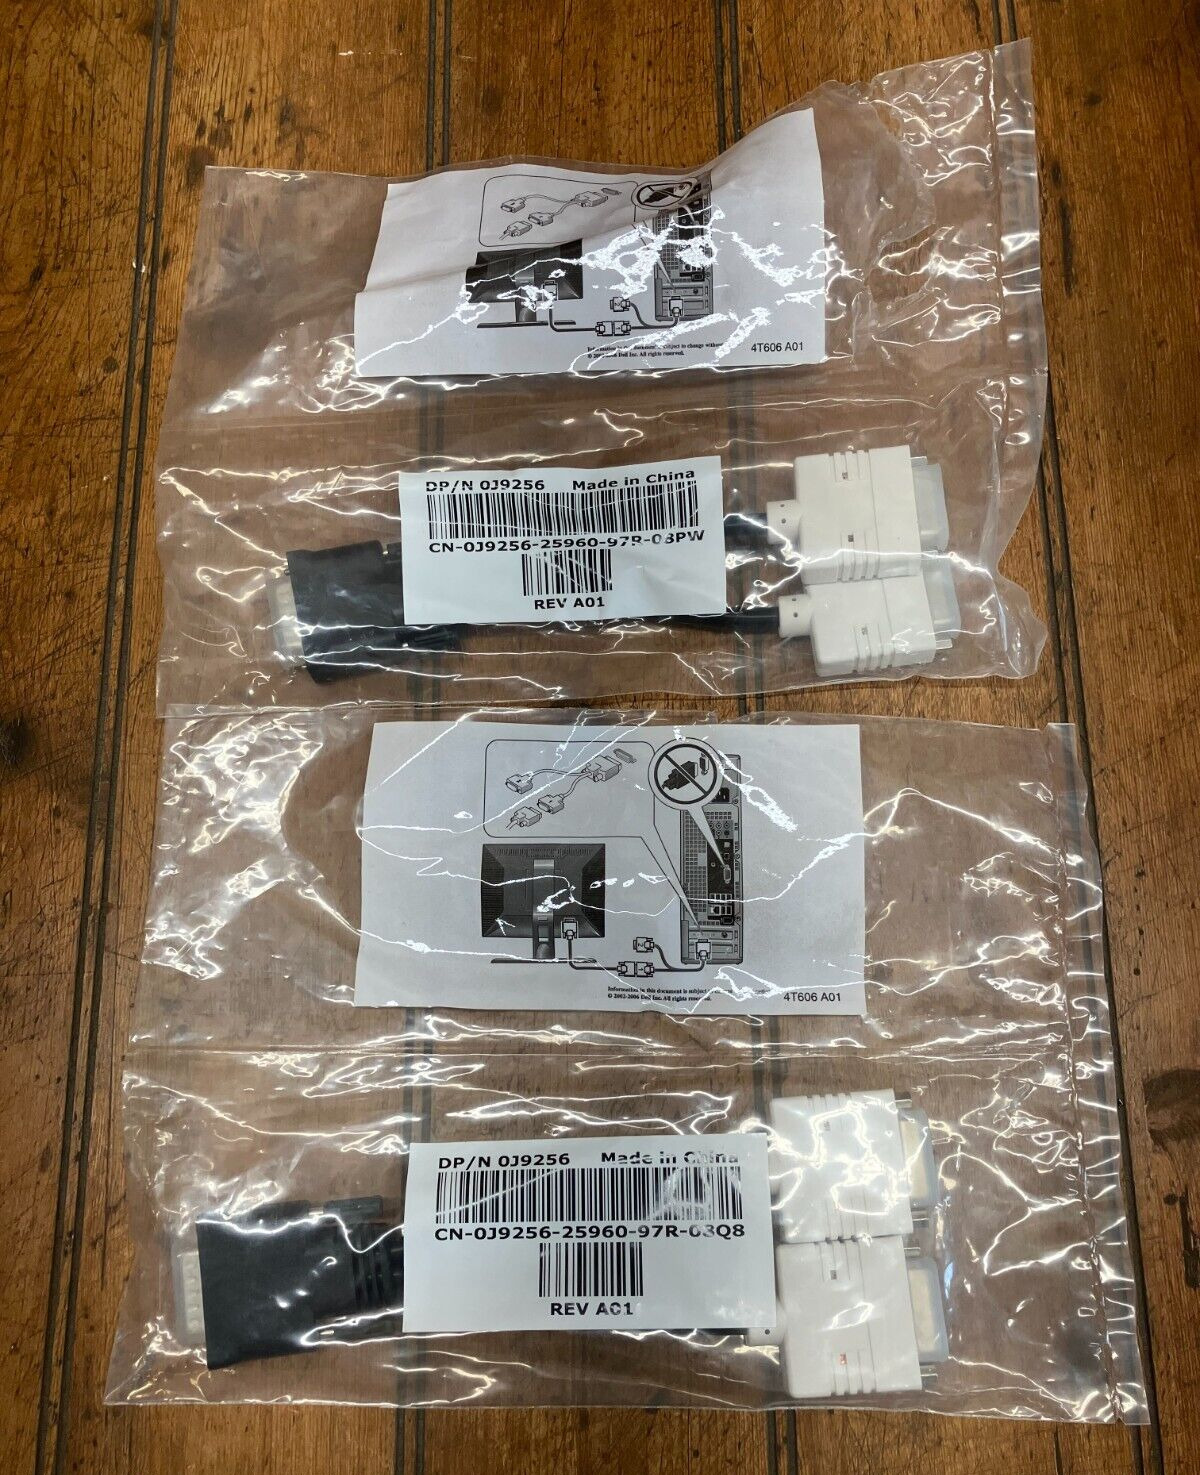 2 New Sealed Dell 4T606 A01 Dual DVI - VGA Video Y-Splitter Cables  